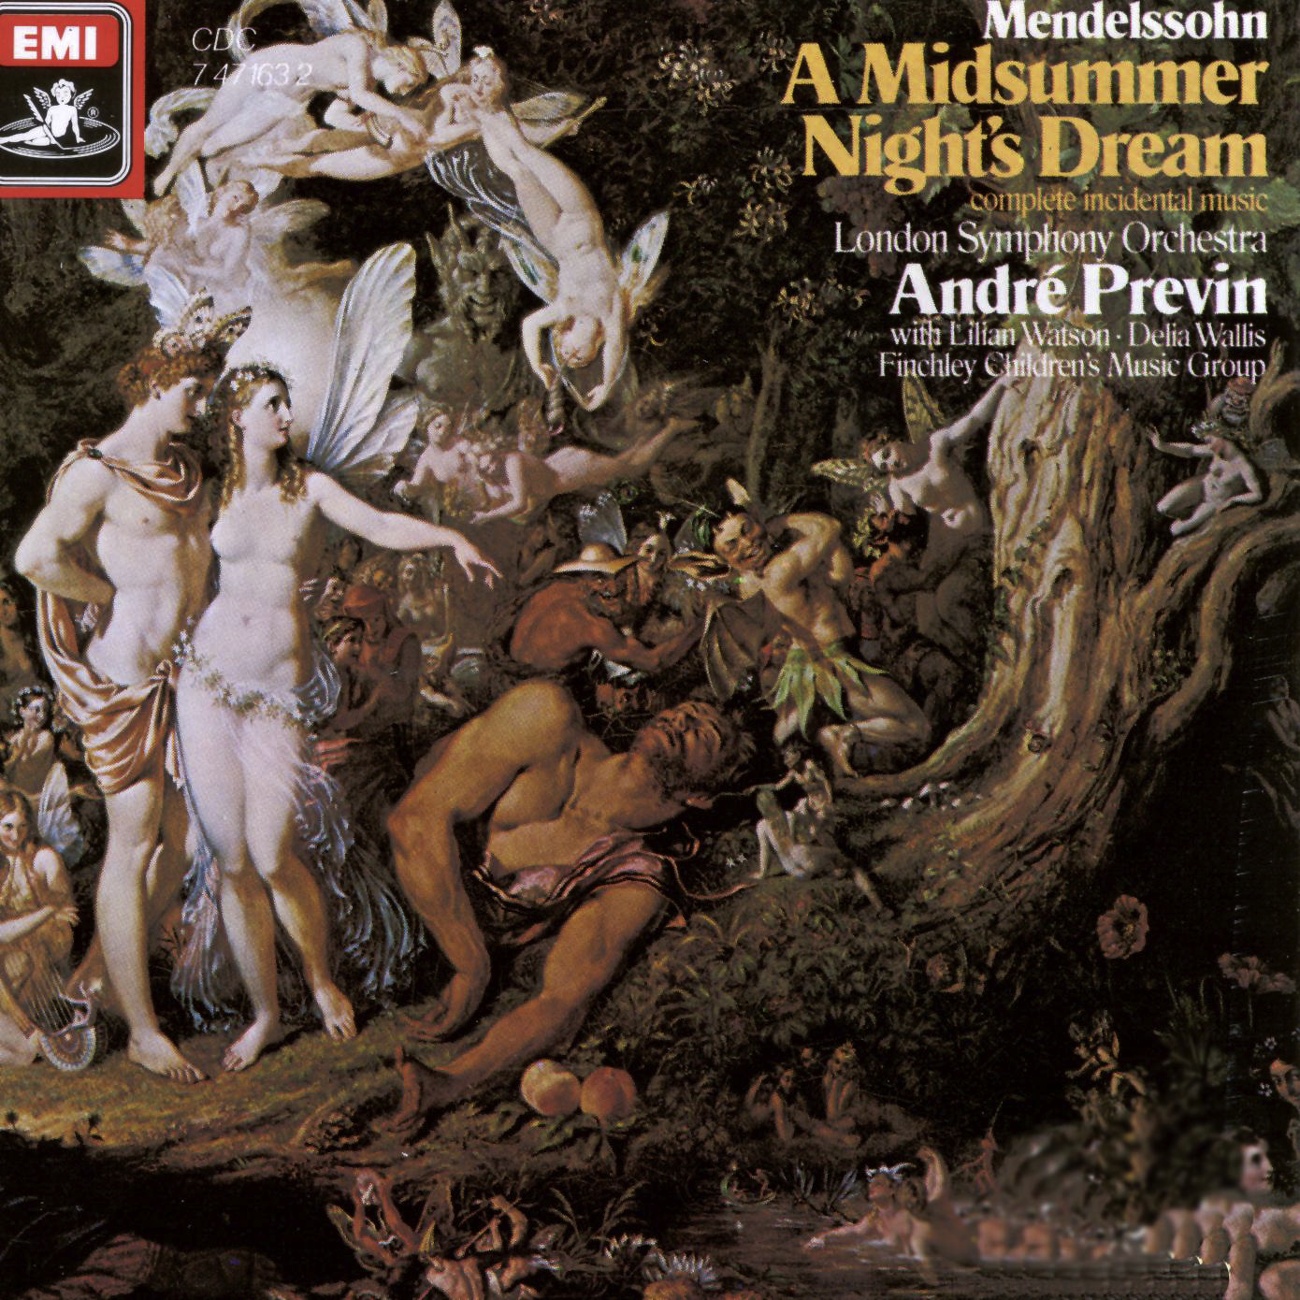 A Midsummer Night's Dream - incidental music Opp. 21 and 61 (1985 Digital Remaster): Wedding March (Entr'acte to Act 5)